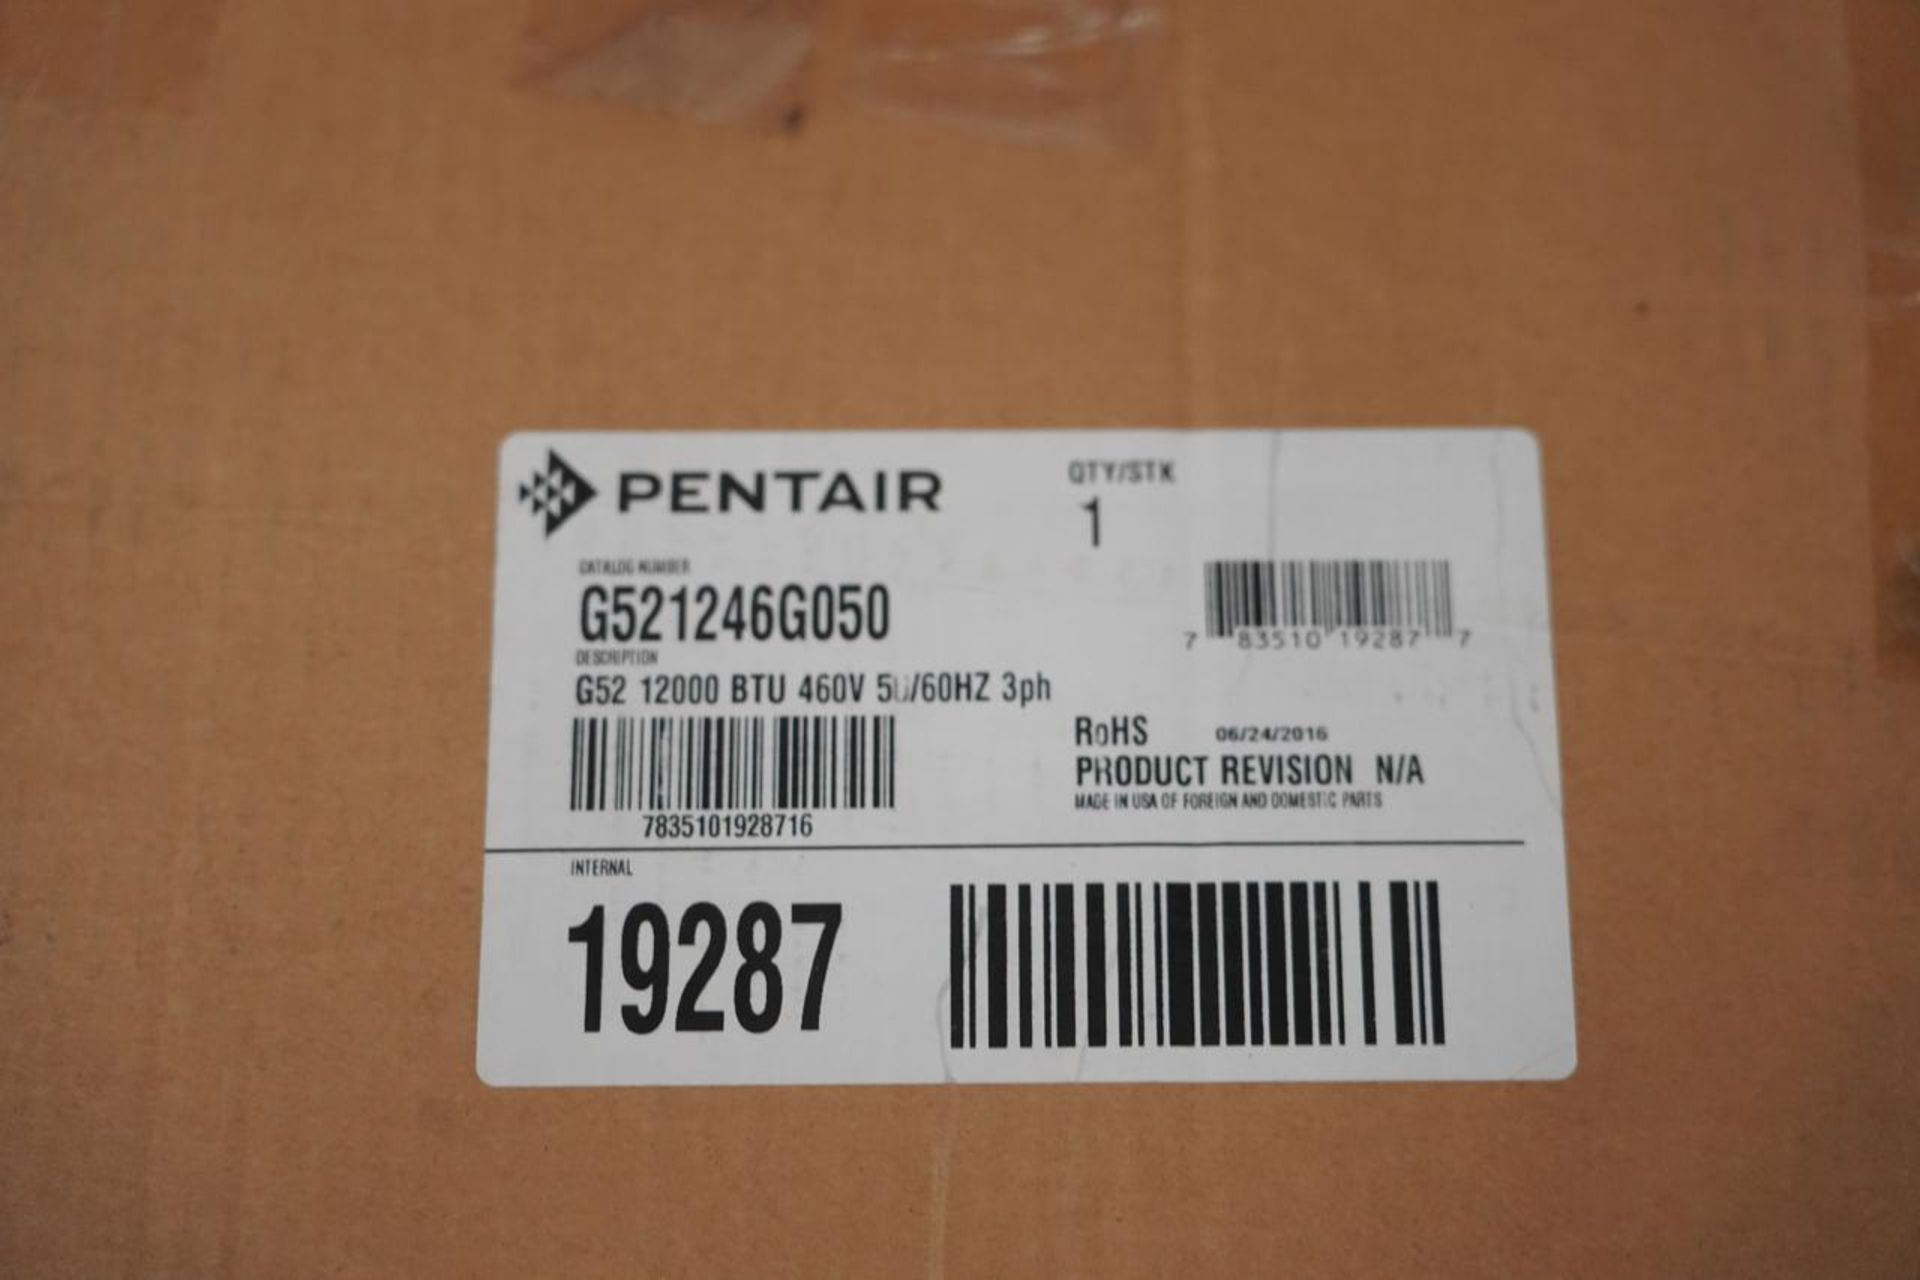 Rittal/Pentair (2) Pentair Electronic Enclosure Air Conditioners, - Image 5 of 10